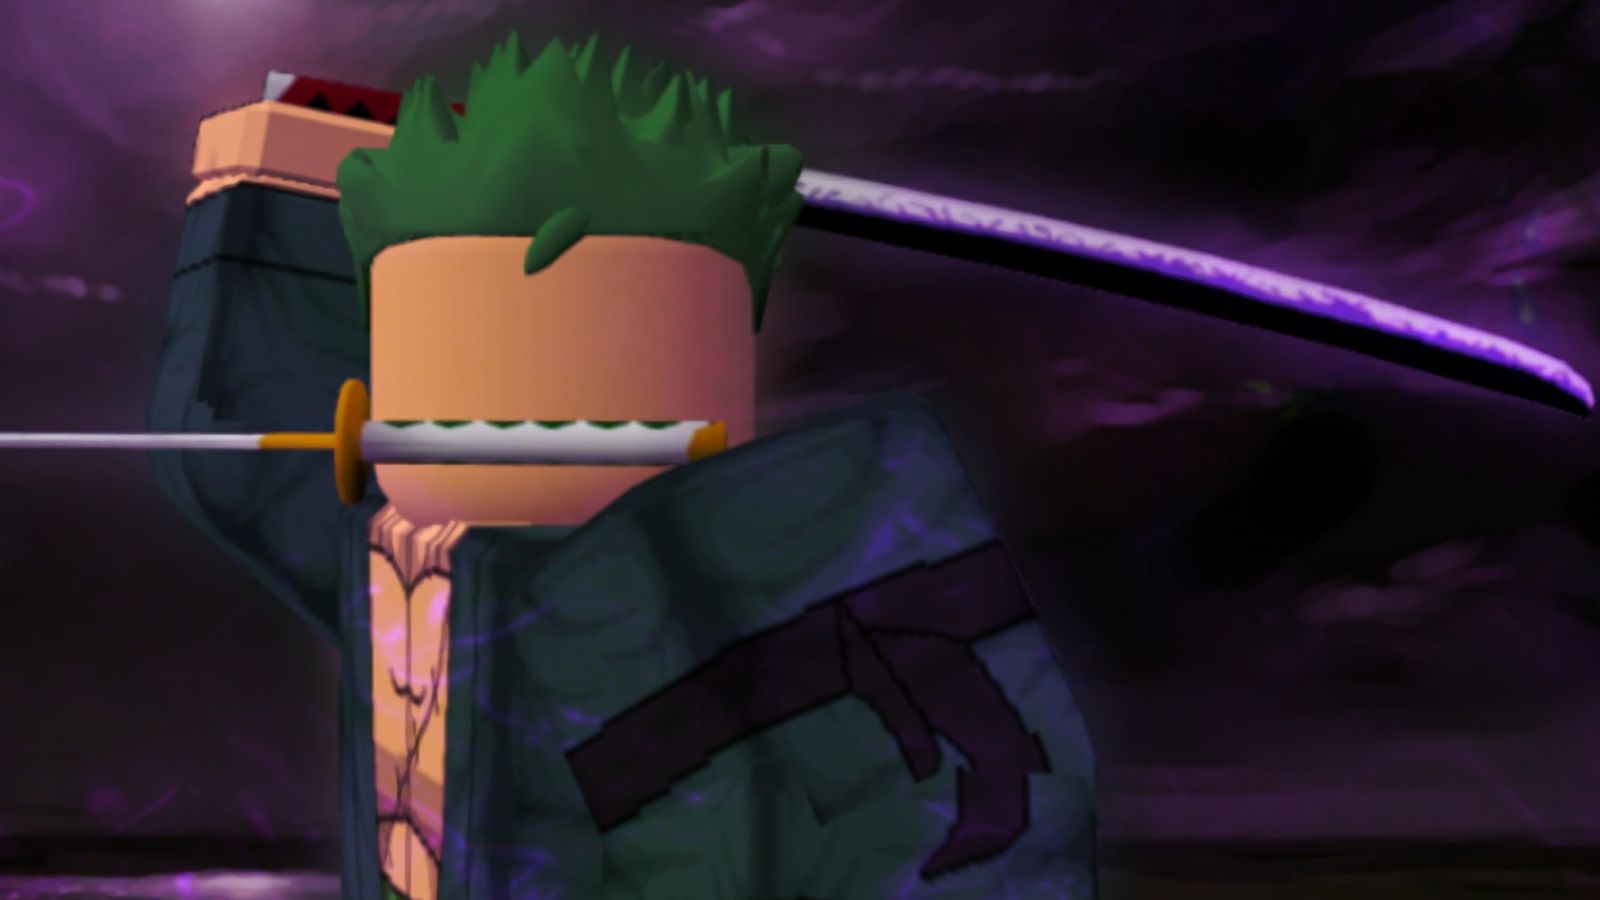 Image of a sword-wielding Roblox character in Cursed Seas.